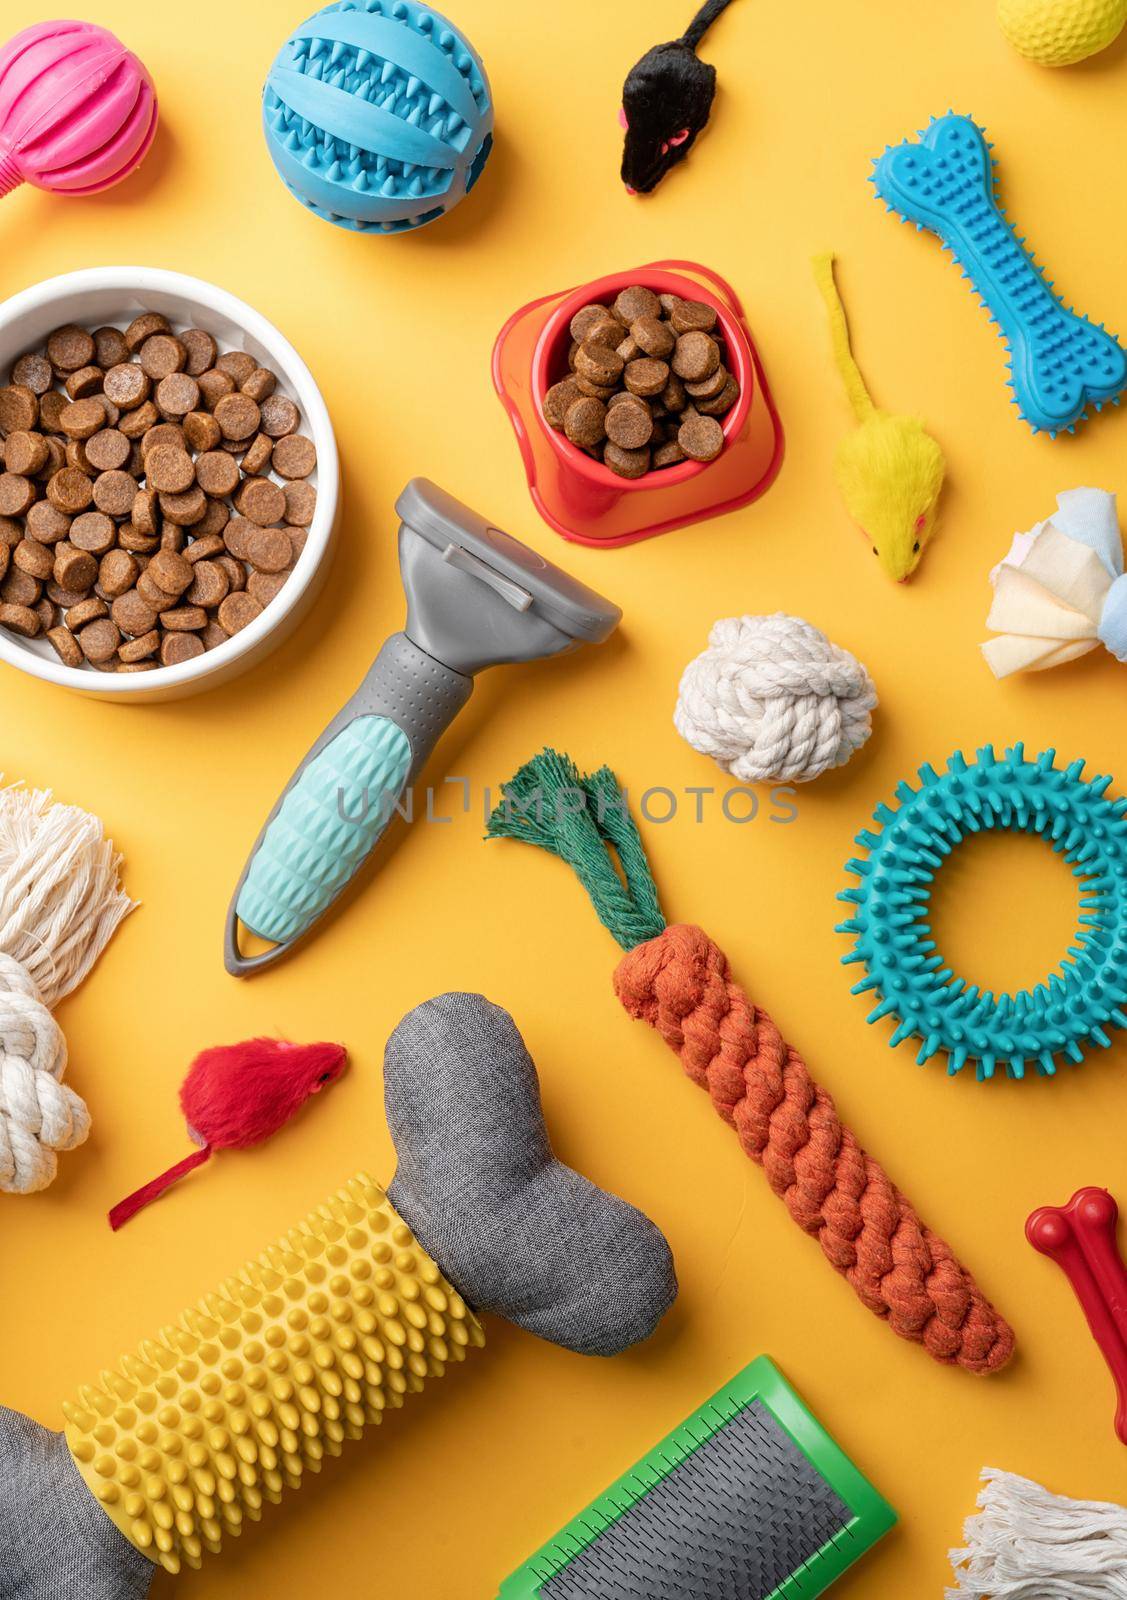 Pet care concept, various pet accessories and tools, toys, balls, brushes on yellow background, flat lay pattern